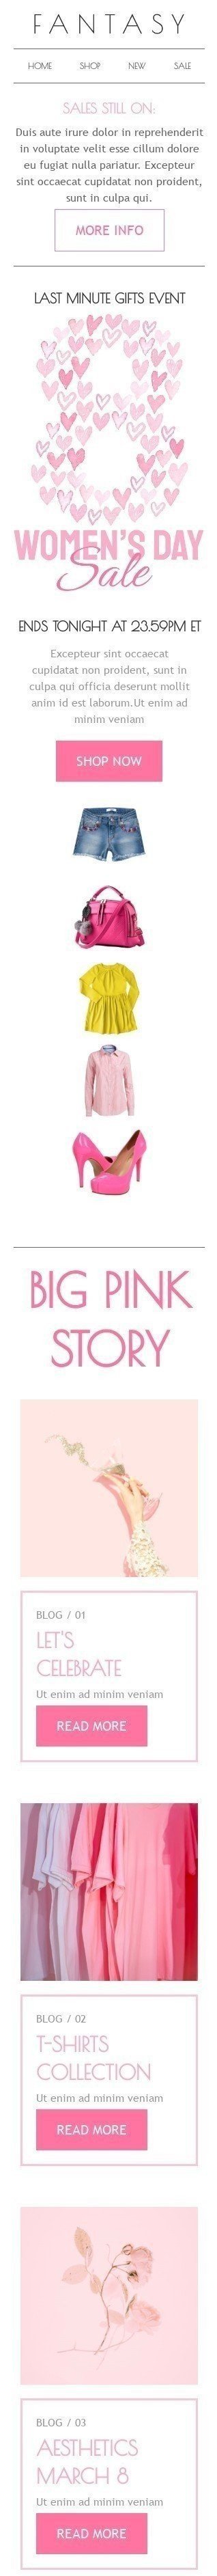 Women's Day Email Template "Big pink story" for Fashion industry mobile view